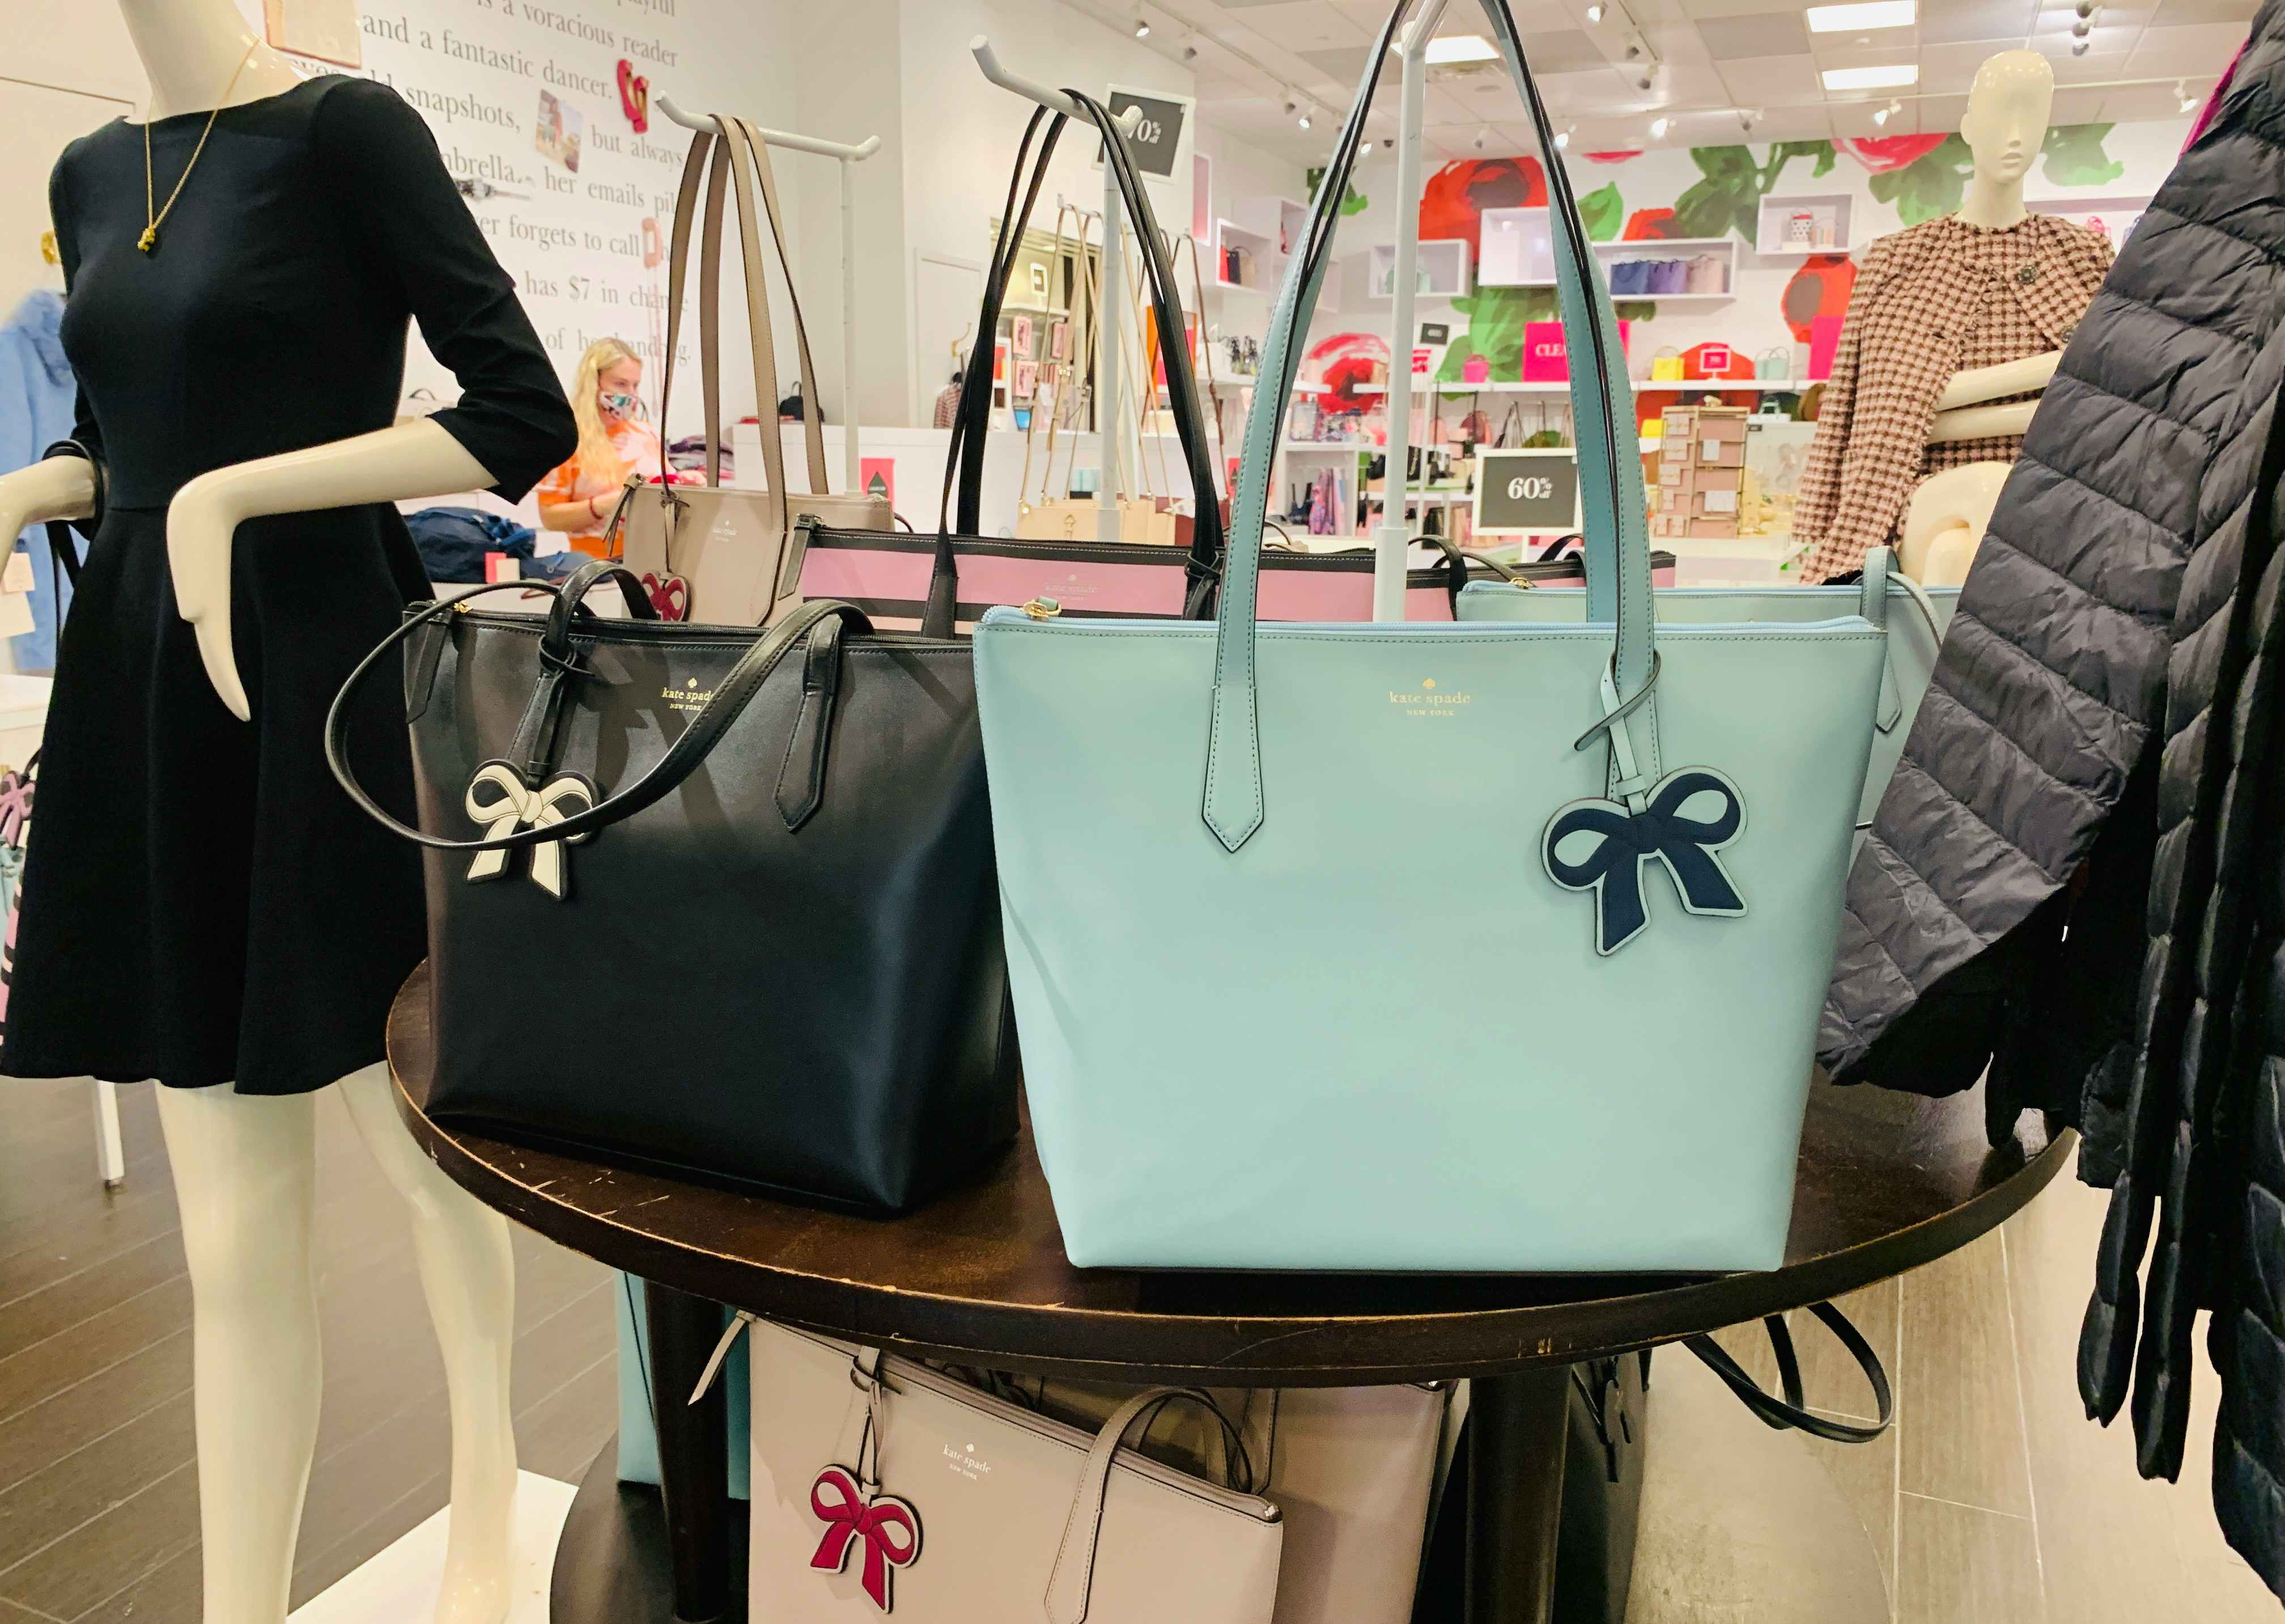 A display of tote bags inside a Kate Spade store.